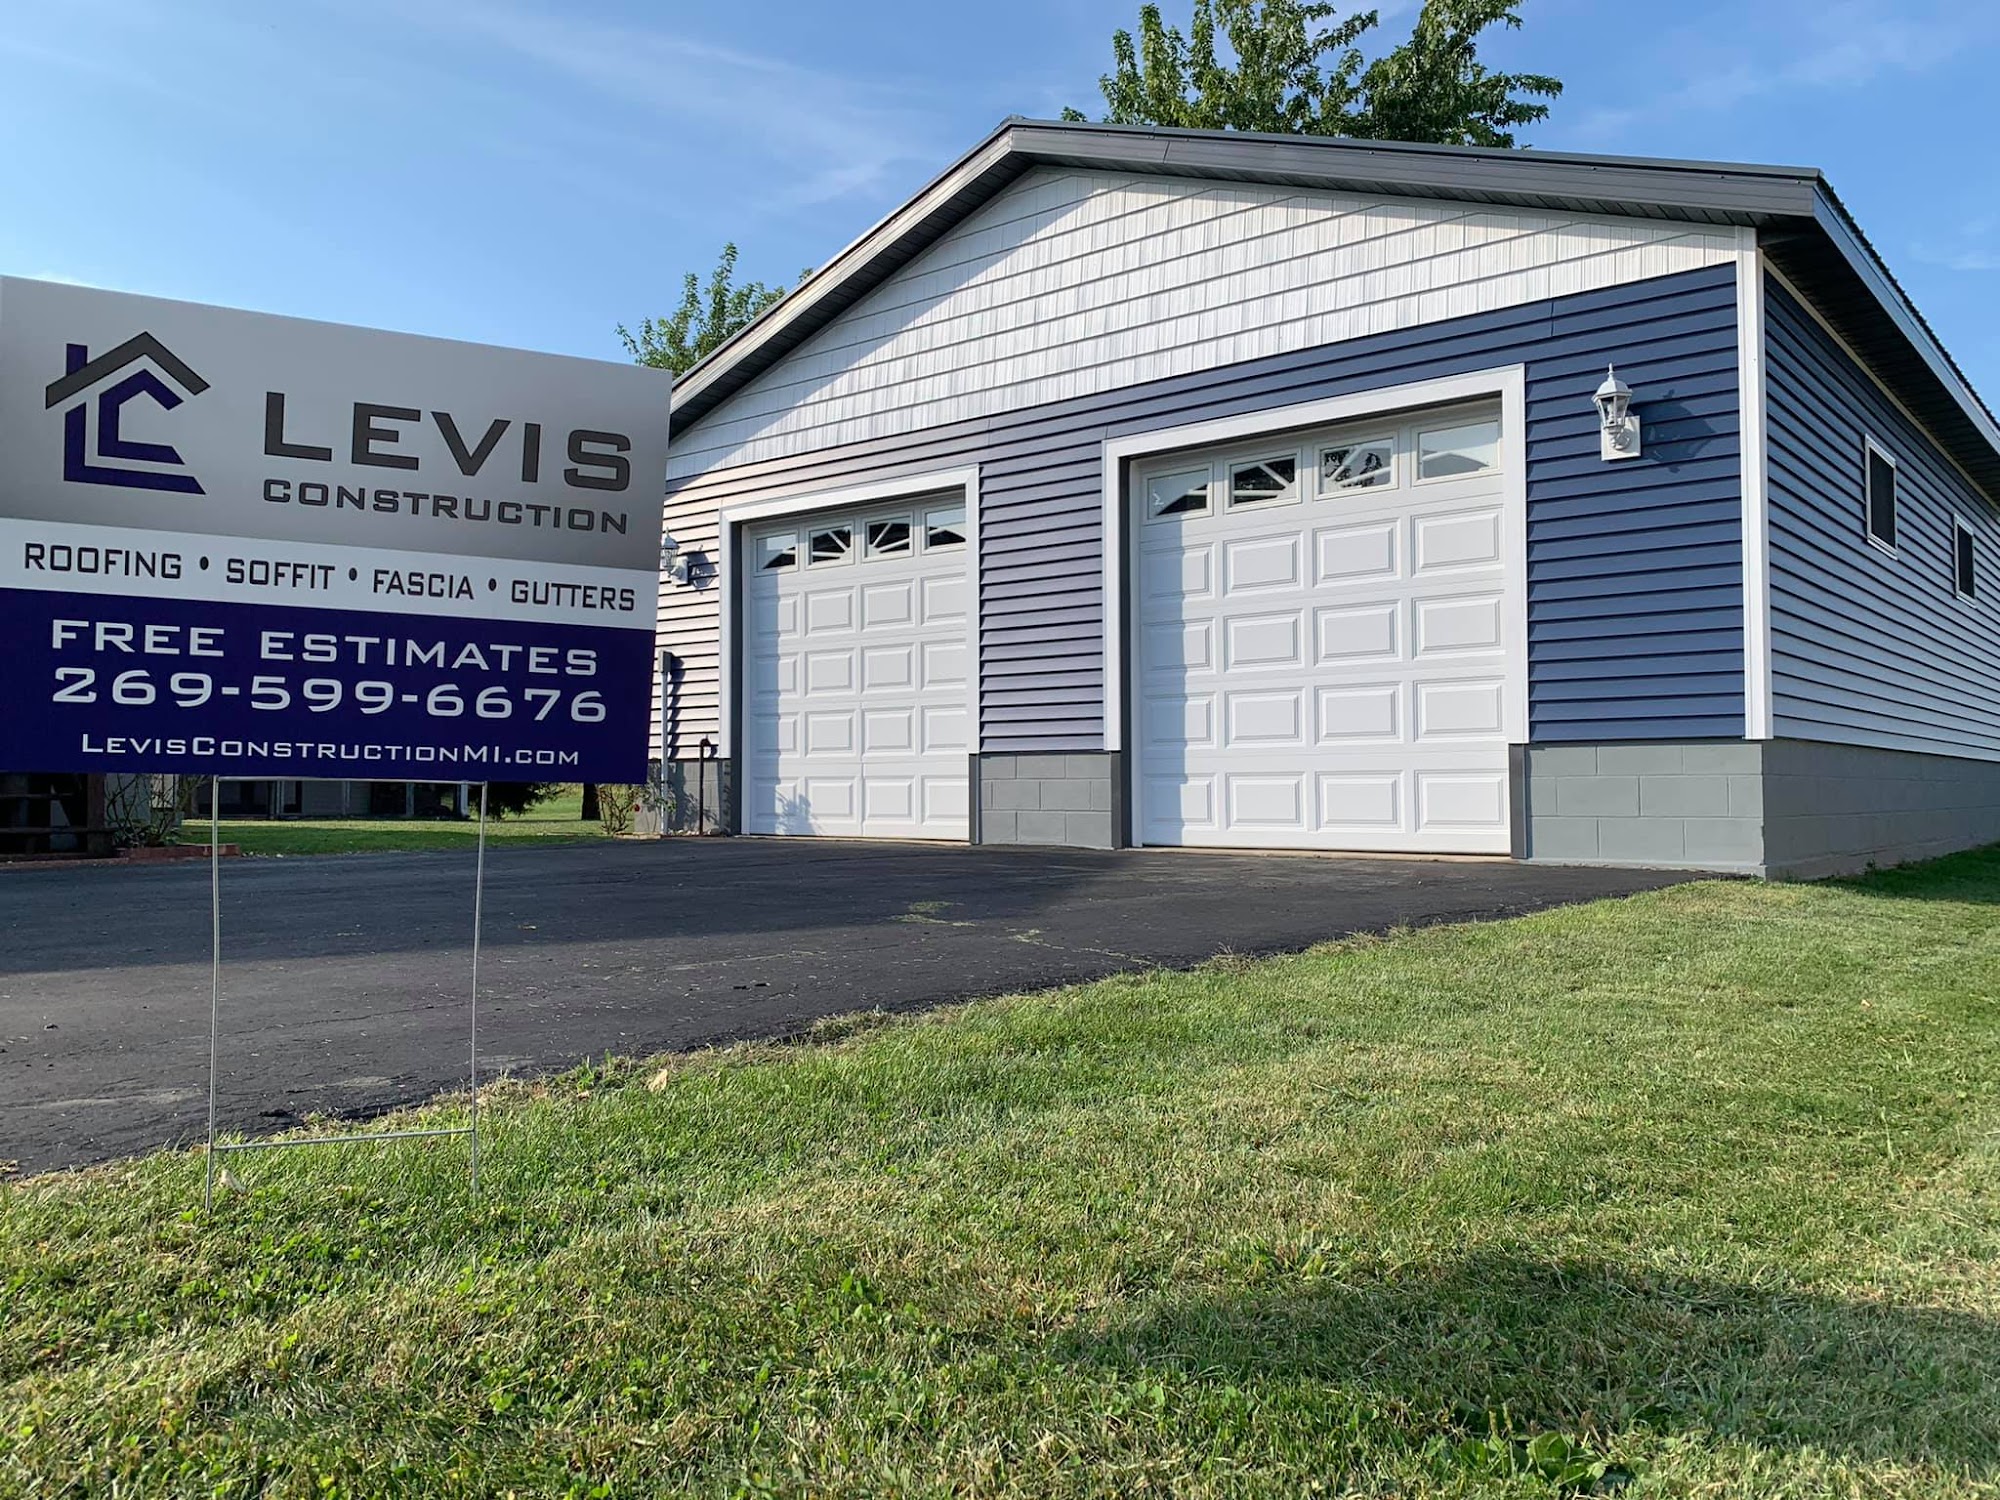 Levis Roofing & Construction 84356 2nd St, Hartford Michigan 49057